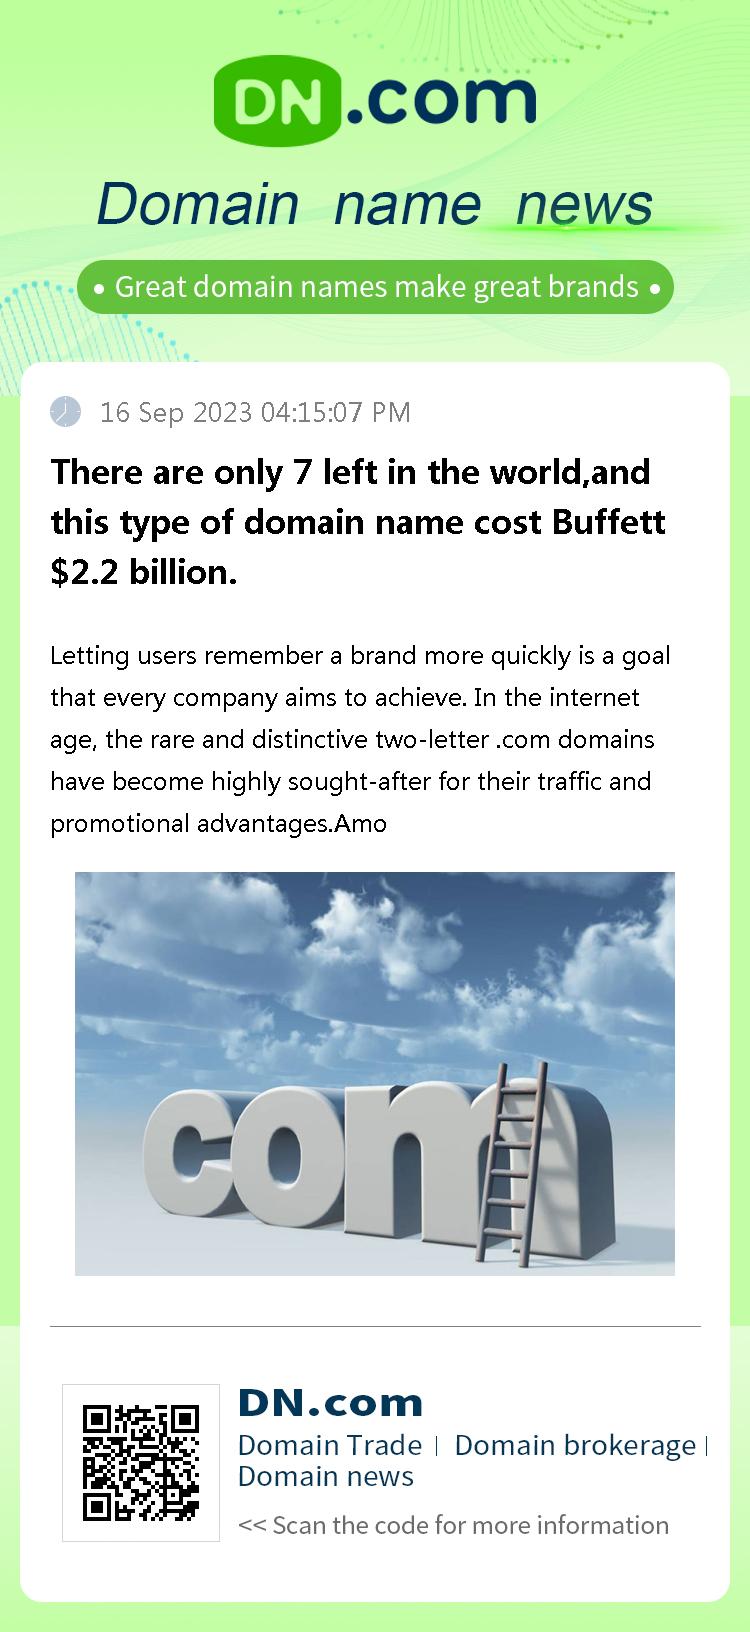 There are only 7 left in the world,and this type of domain name cost Buffett $2.2 billion.